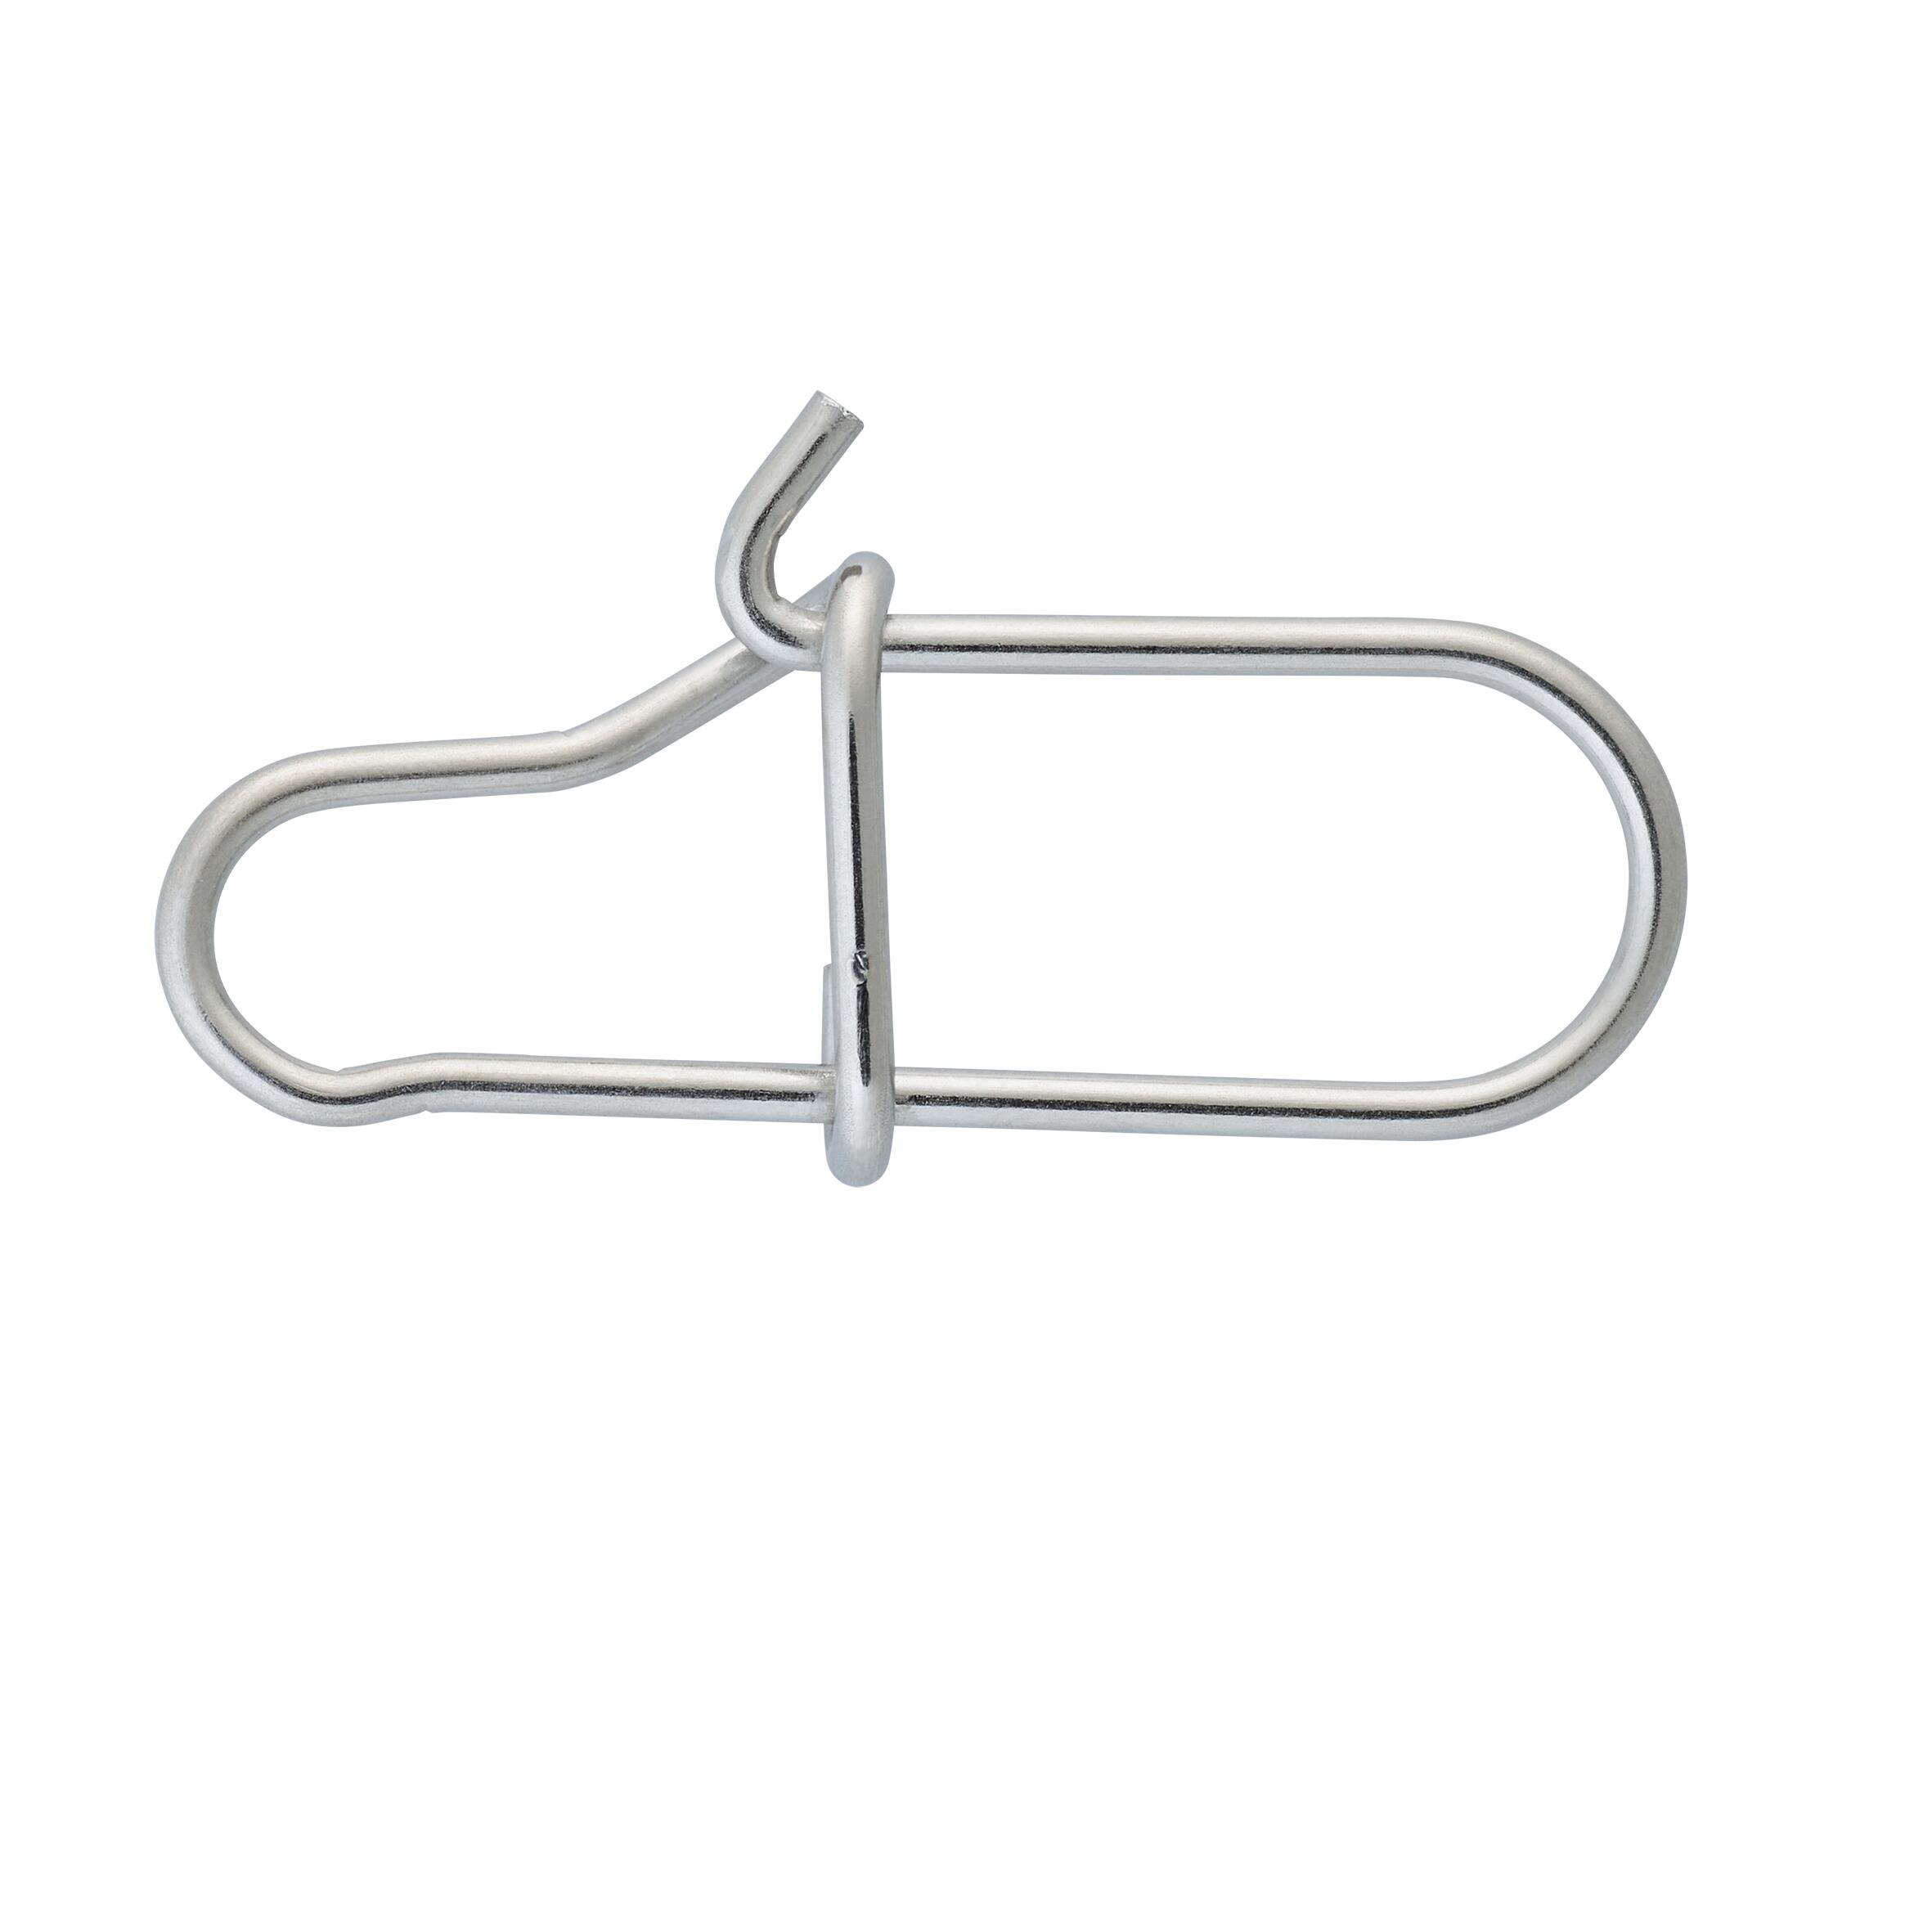 Fishing Stainless Steel Double Snap Clips x10 6/10